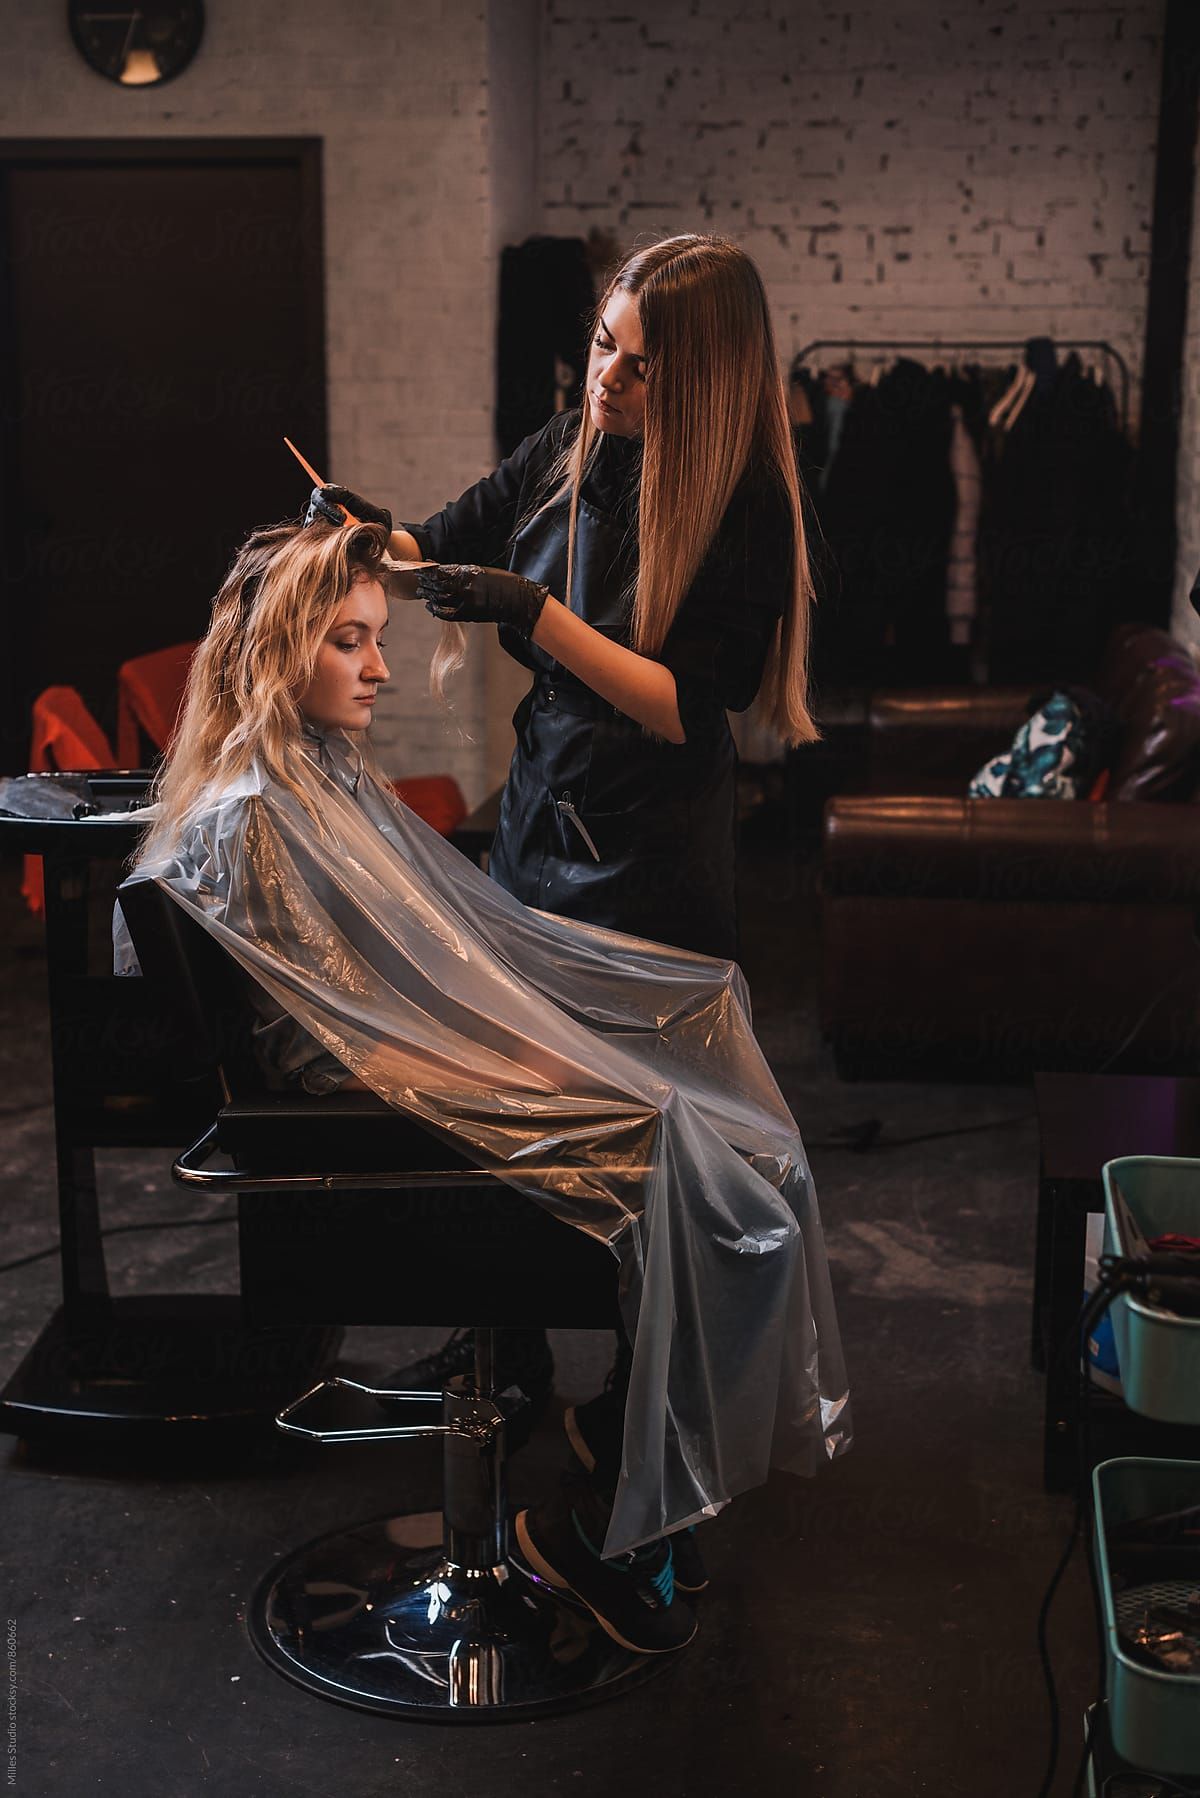 Hairdresser Dyeing Girl’s Hair” by Stocksy Contributor “Milles Studio